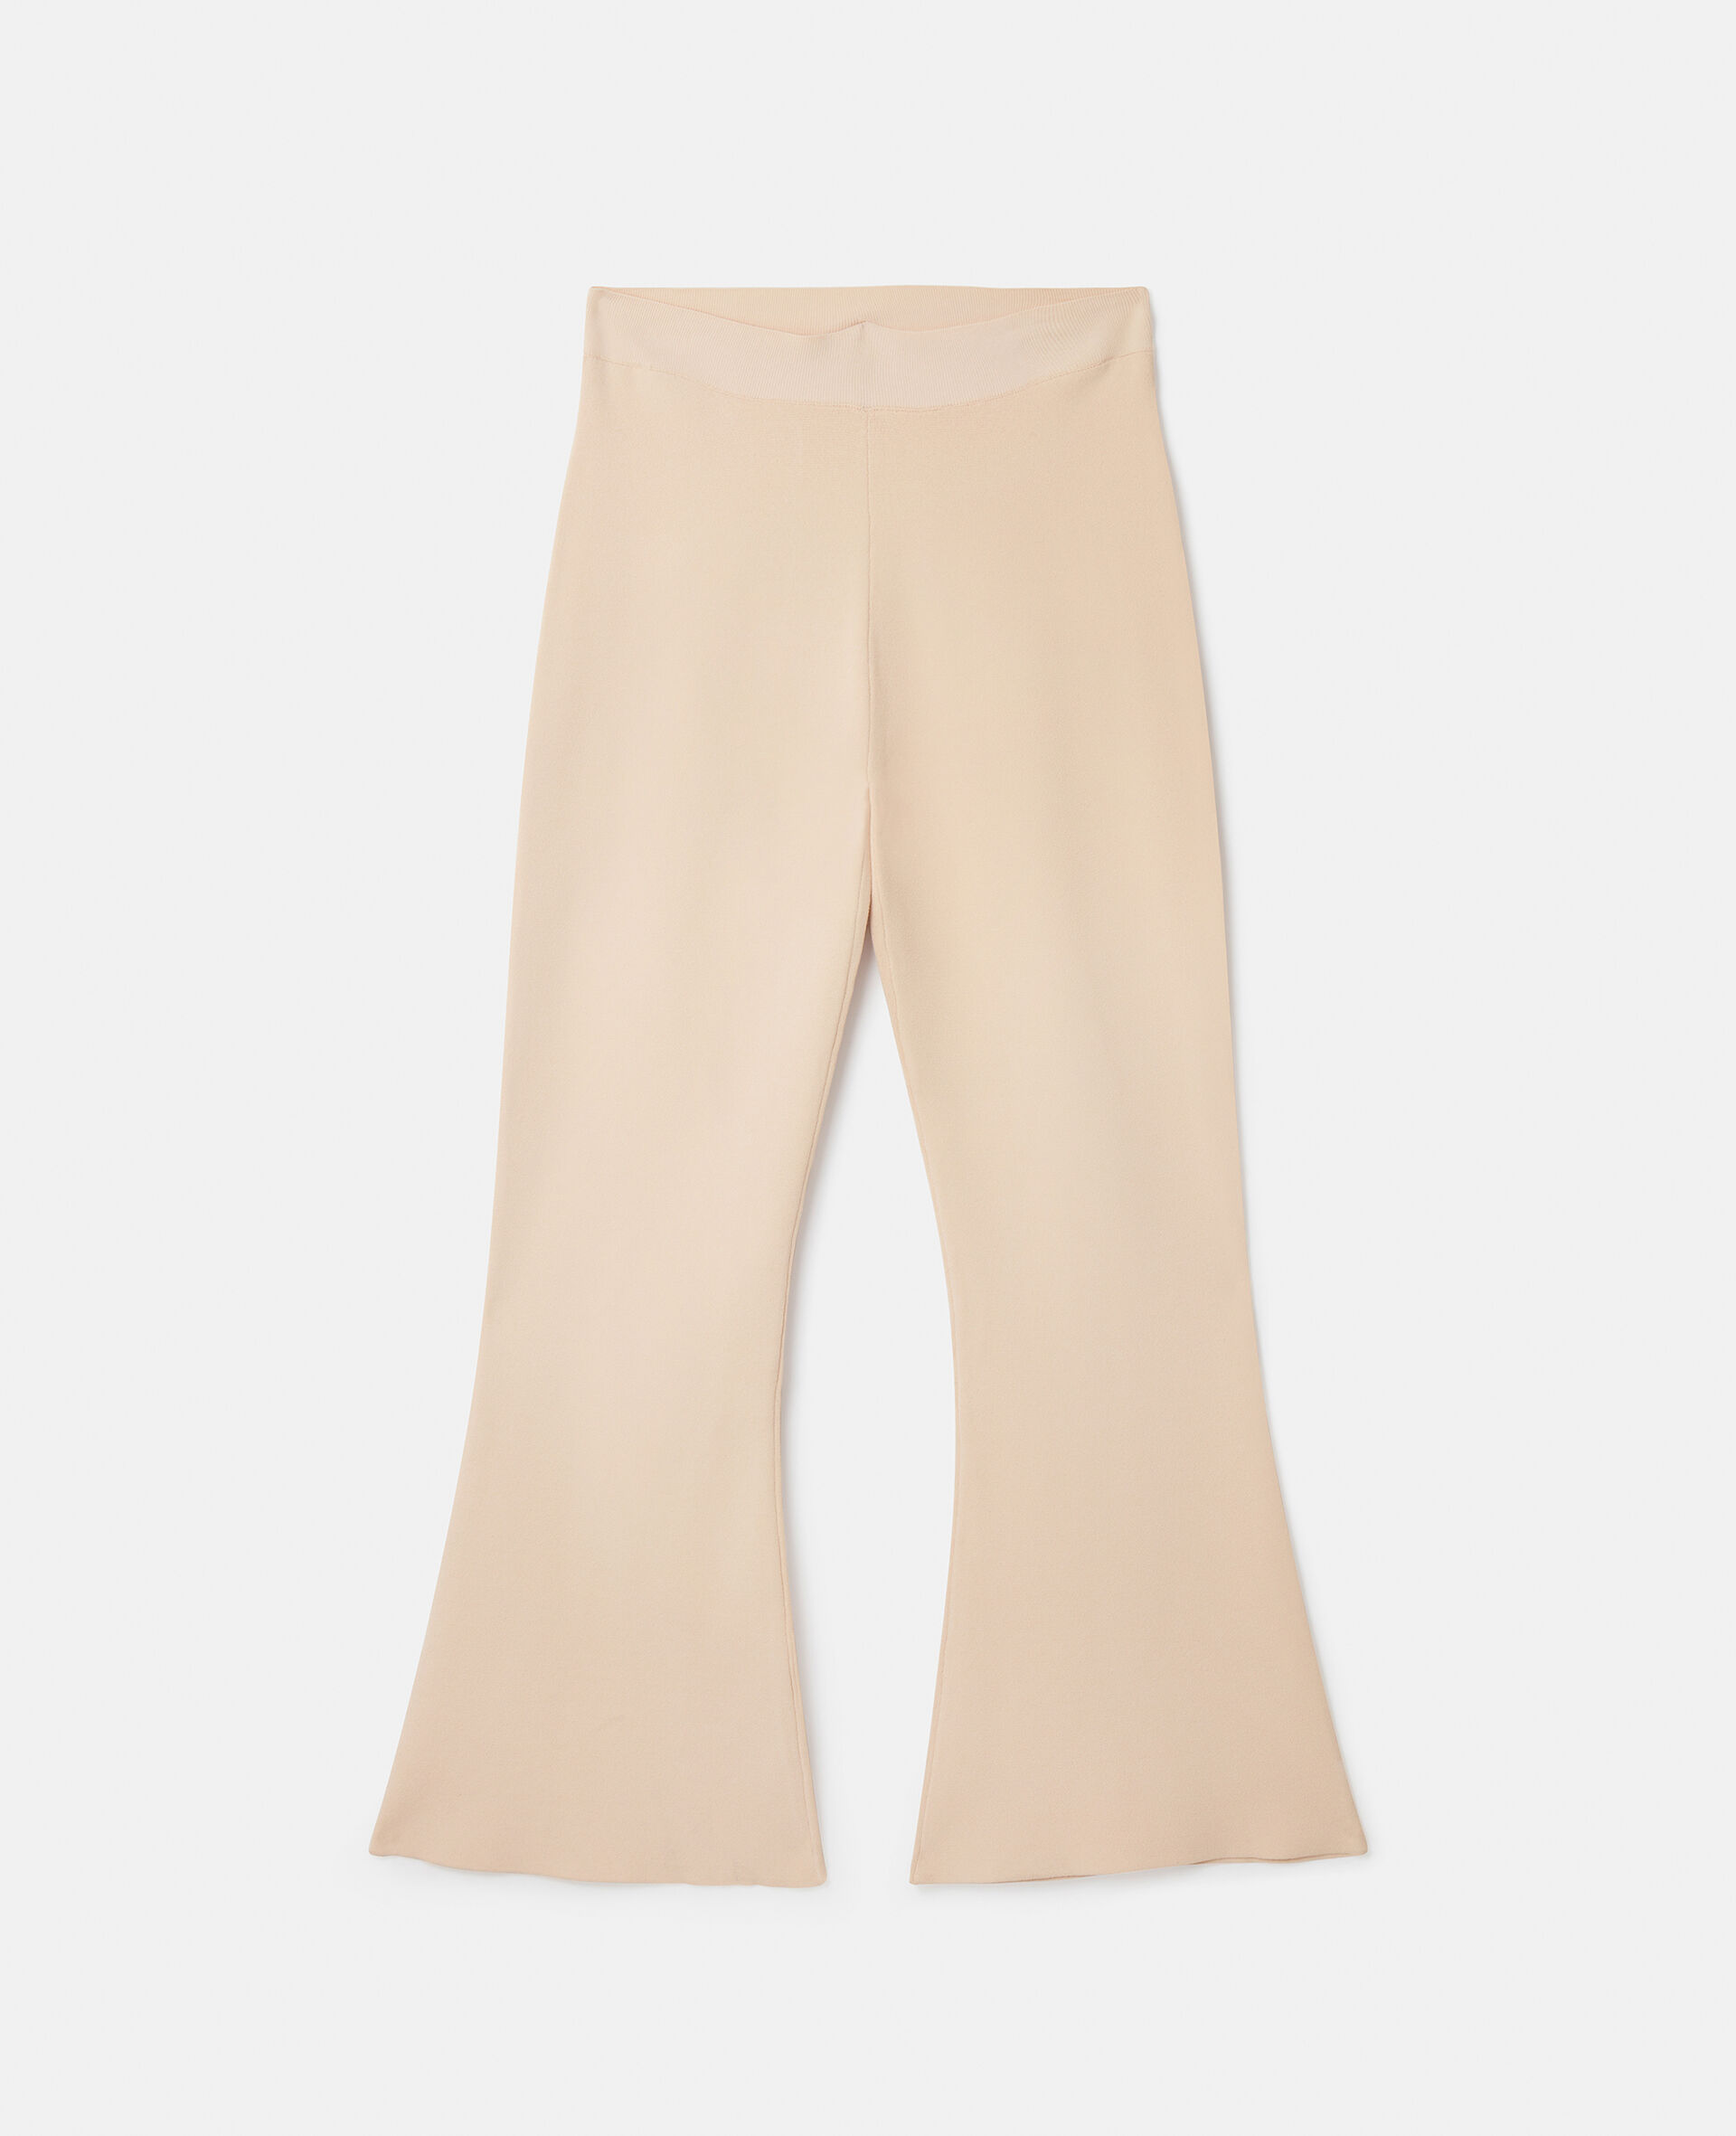 Compact Knit Cropped Flared Trousers-Cream-medium